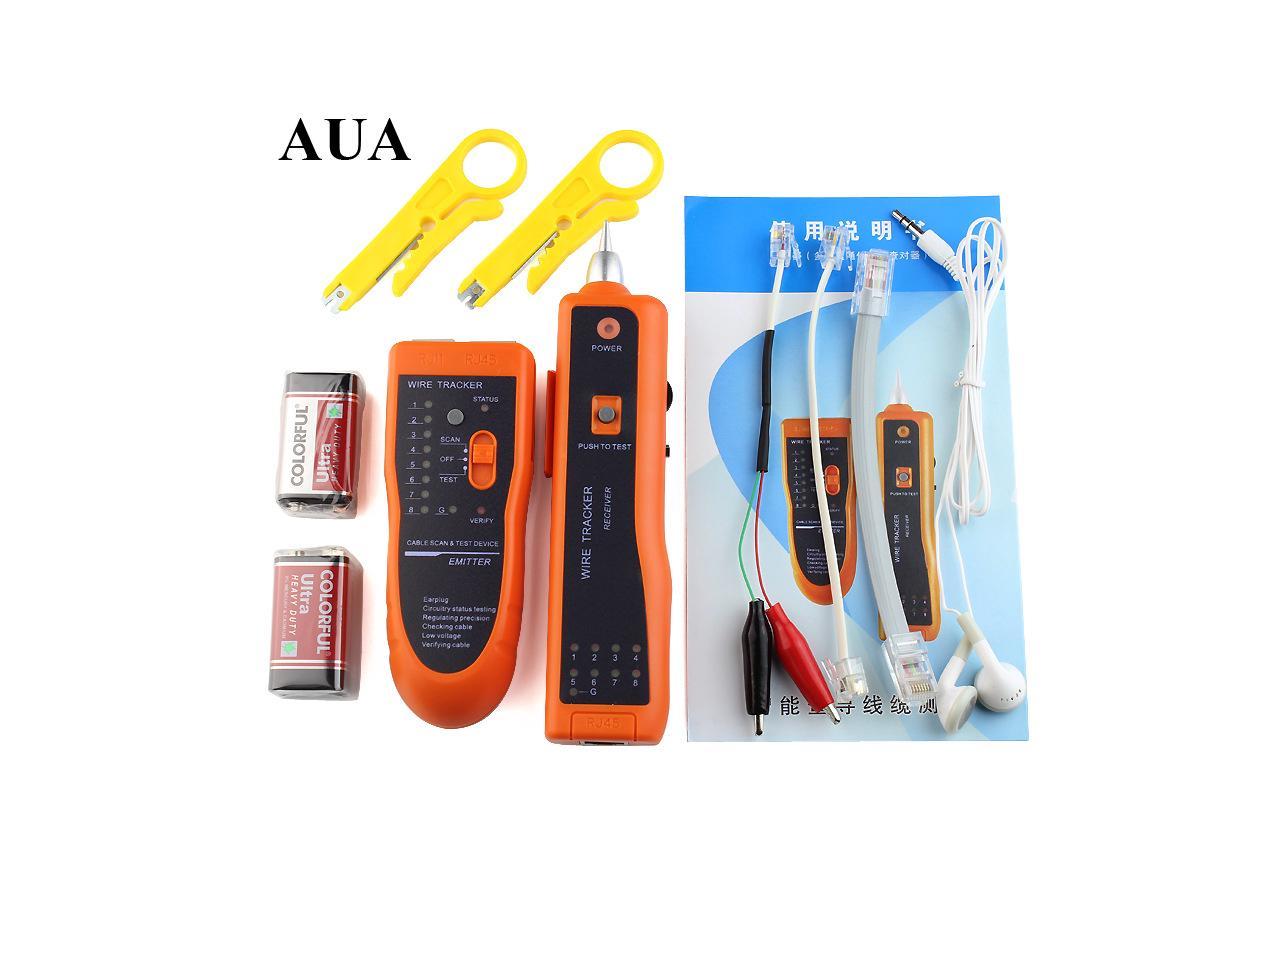 Cable Finder Tone Generator Probe Tracker Wire Network Tester Tracer Kit J6 J6x6 for sale online 